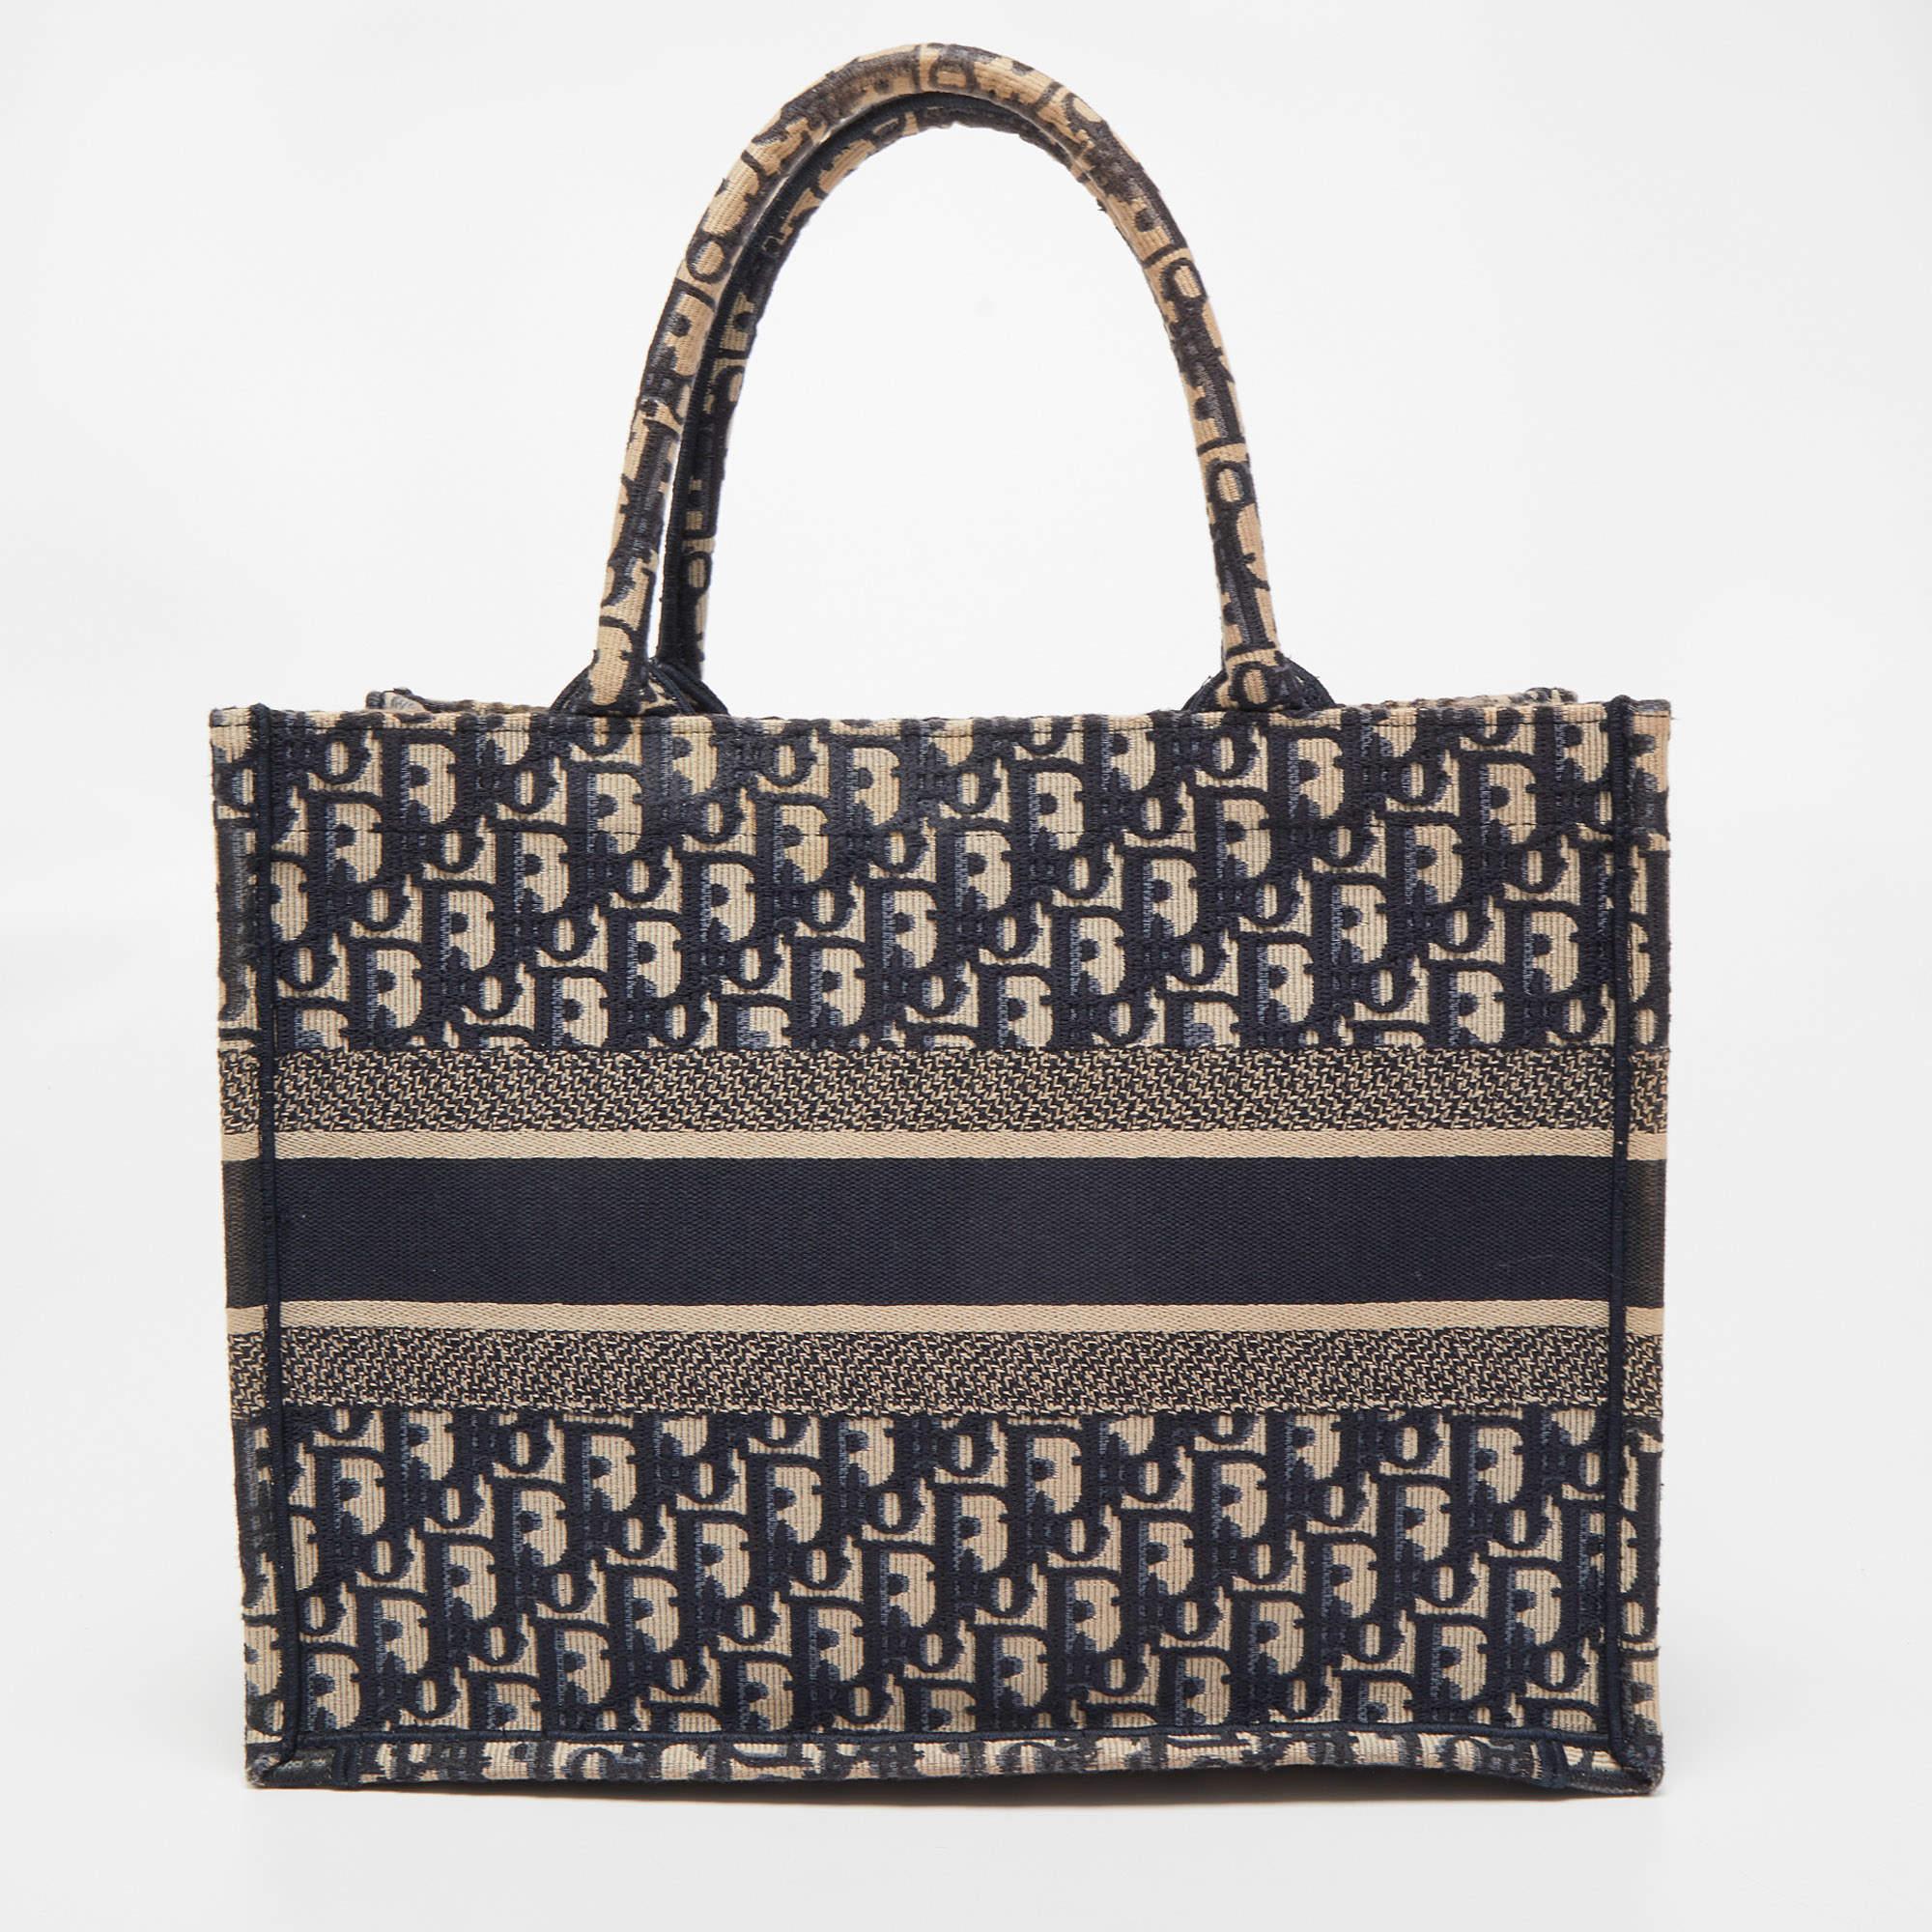 
Designed by Maria Grazia Chiuri, the Dior Book Tote is a travel accessory for people with style. The bag here is crafted using canvas into a beautiful structure and is covered in Oblique embroidery. Two handles, the 'Christian Dior' signature, and